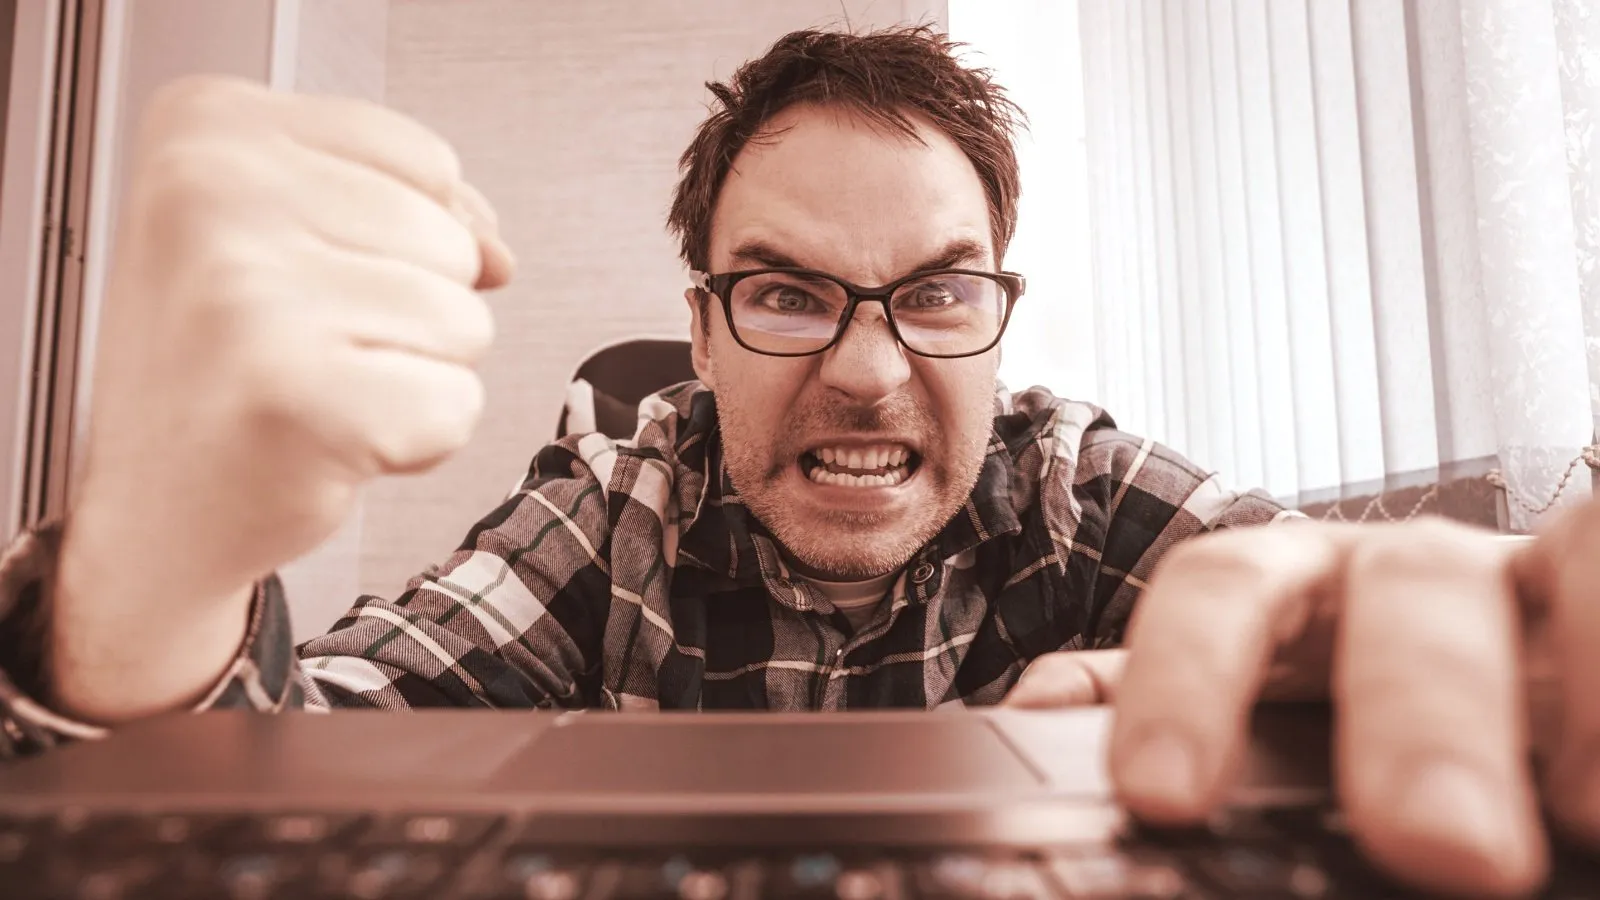 Angry man shaking fist at his computer. Image: Shutterstock.